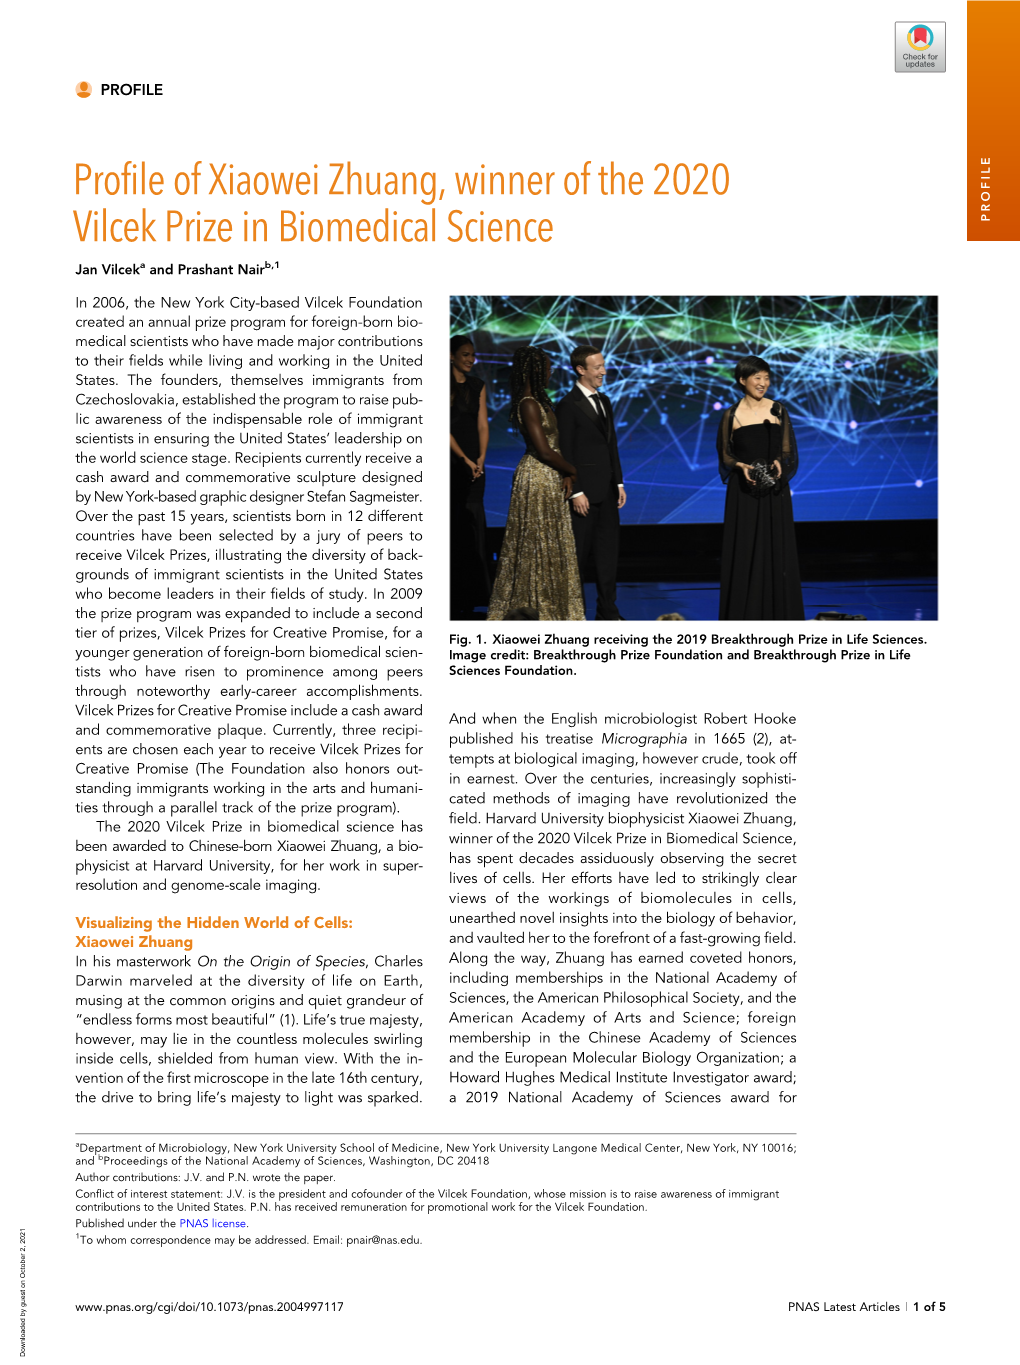 Profile of Xiaowei Zhuang, Winner of the 2020 Vilcek Prize in Biomedical Science PROFILE Jan Vilceka and Prashant Nairb,1